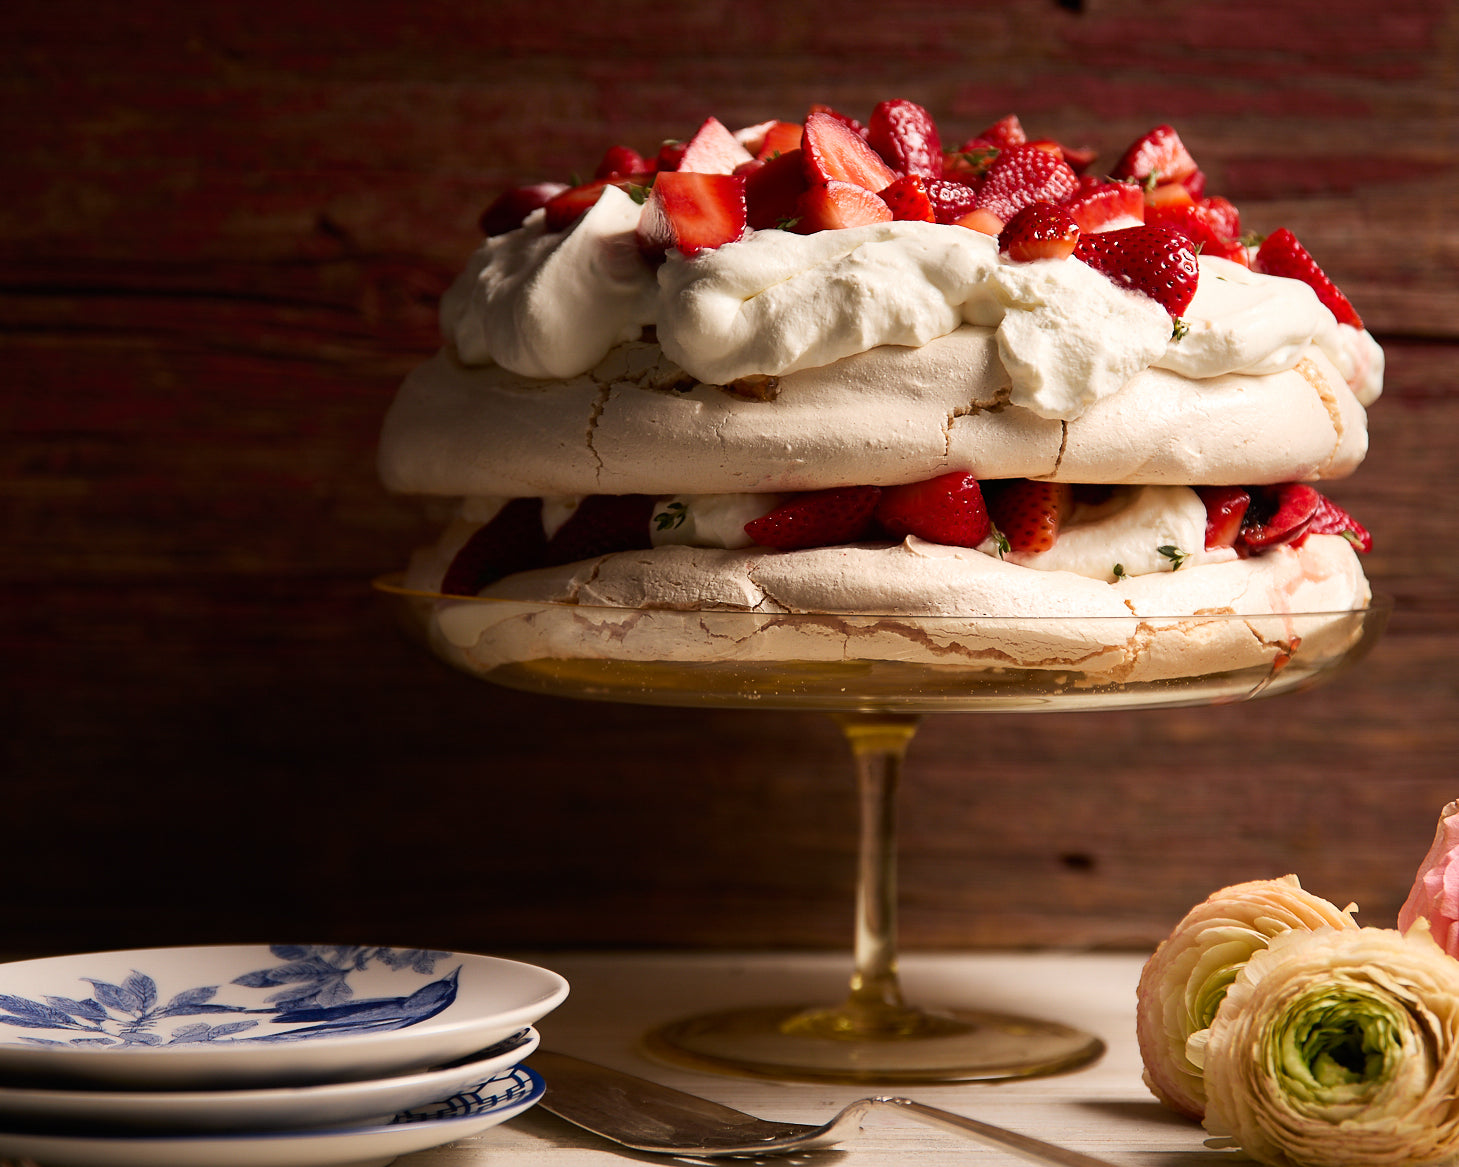 A two-tiered pavlova on a crystal cake stand from Caskata.